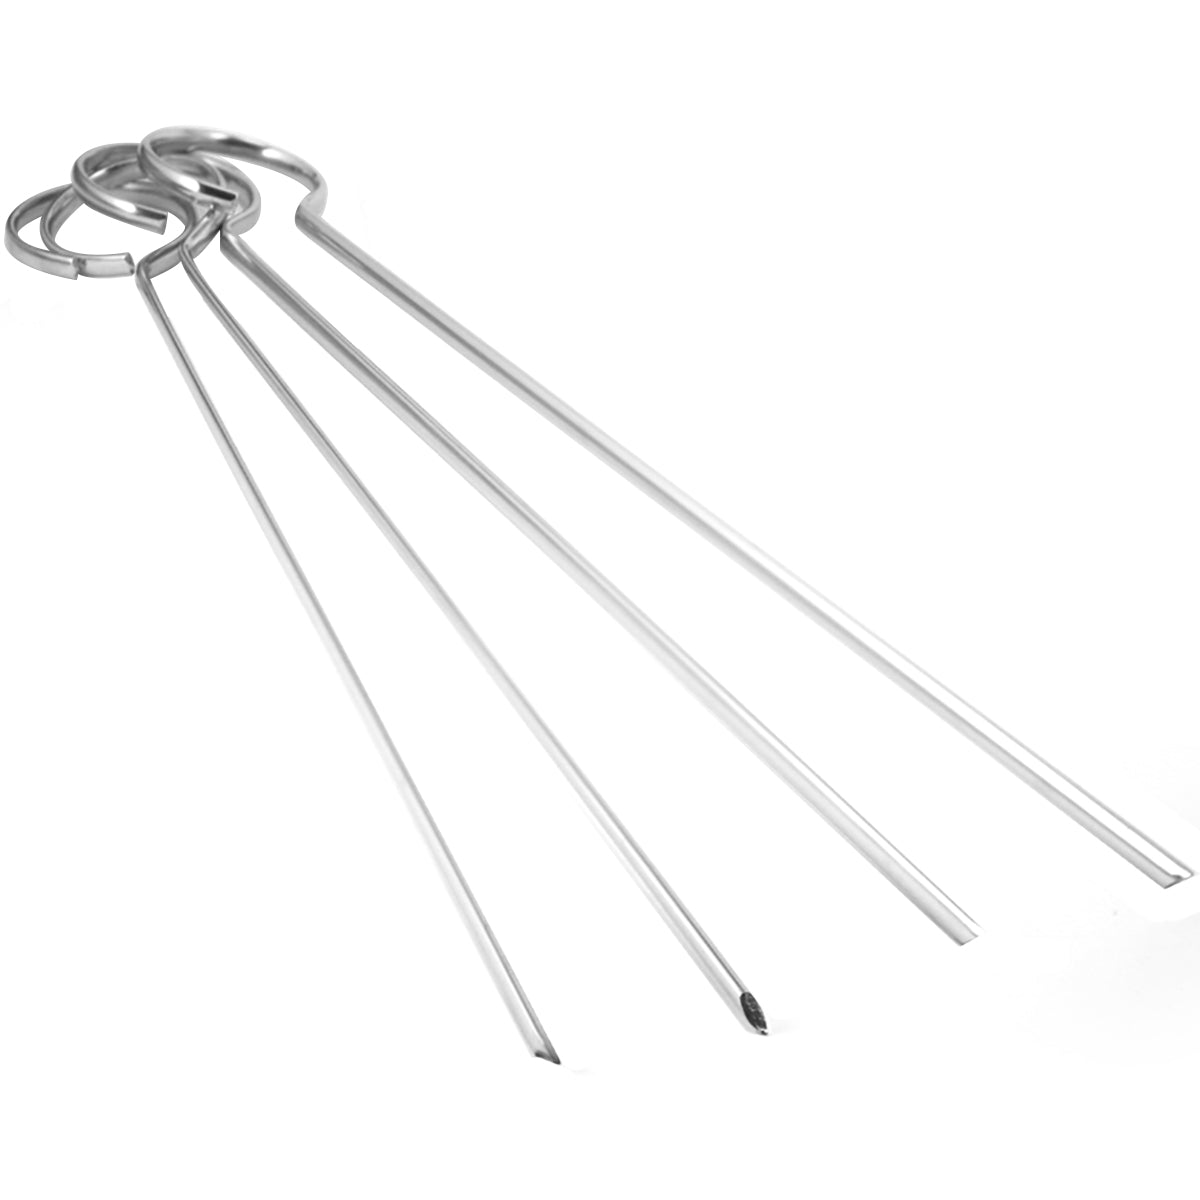 Coghlan's 12" Chrome Plated Skewers - 4-Pack Coghlan's